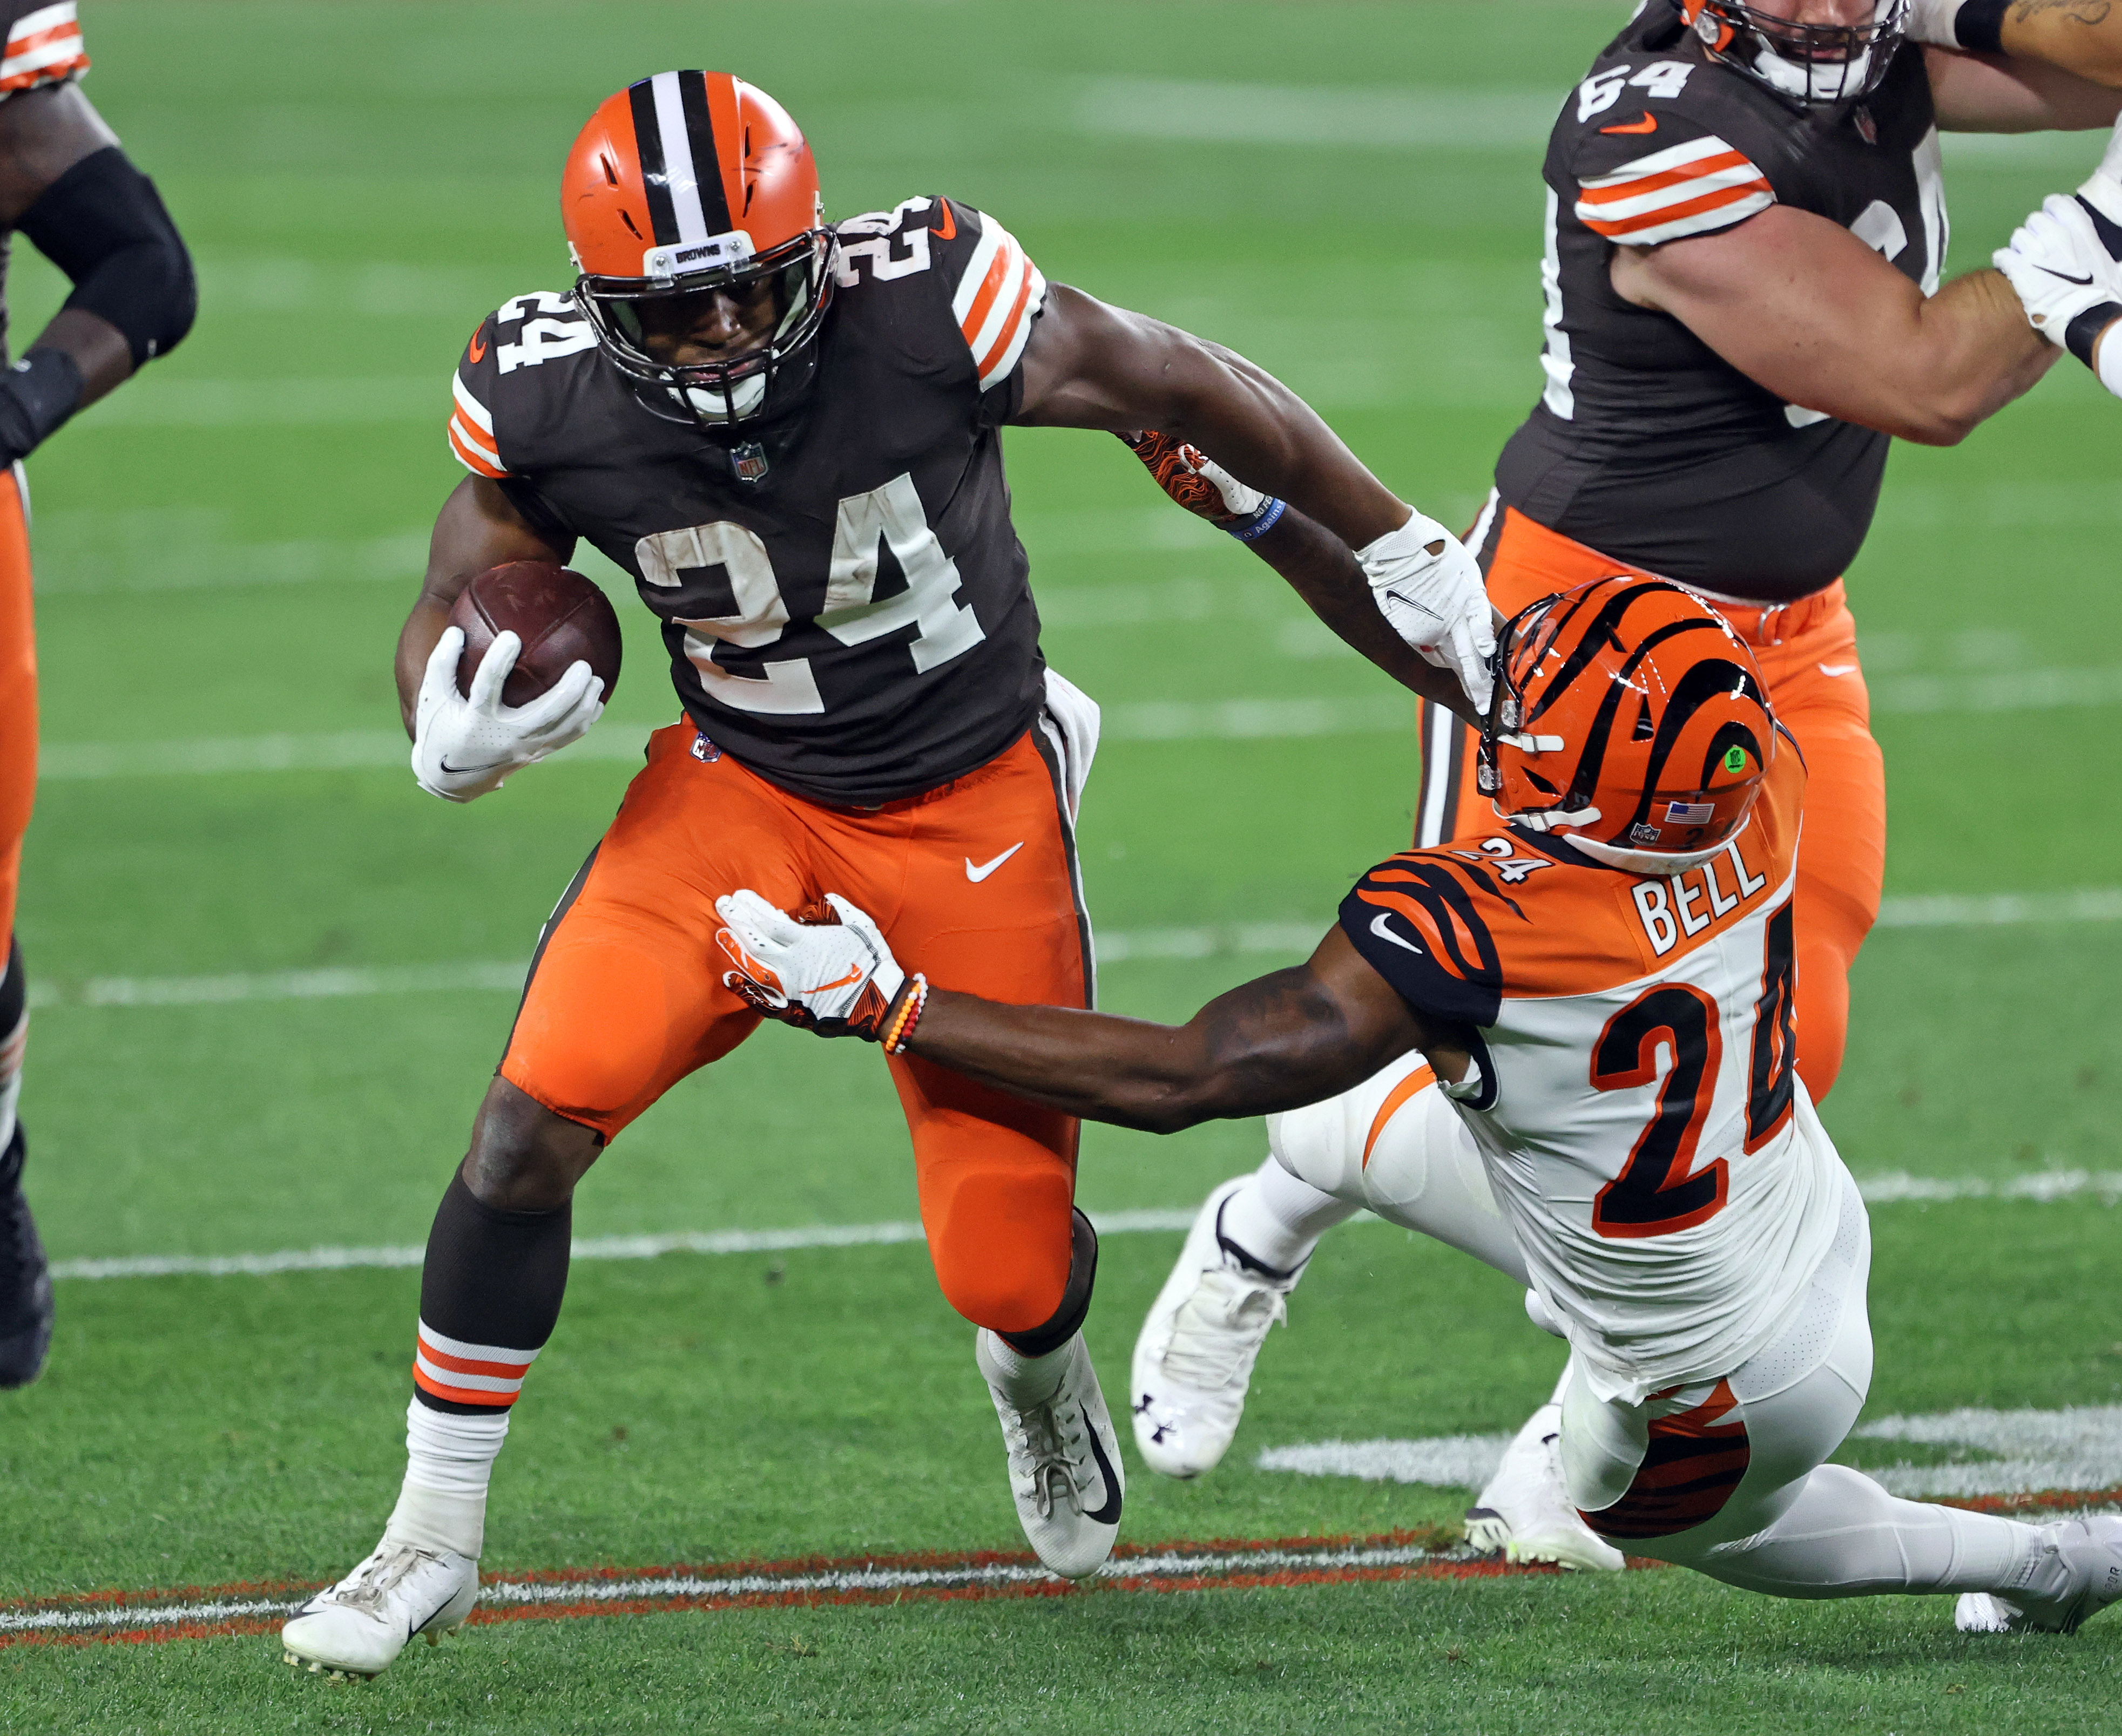 Watch Nick Chubb give the Browns a 10-7 lead vs. Washington with a